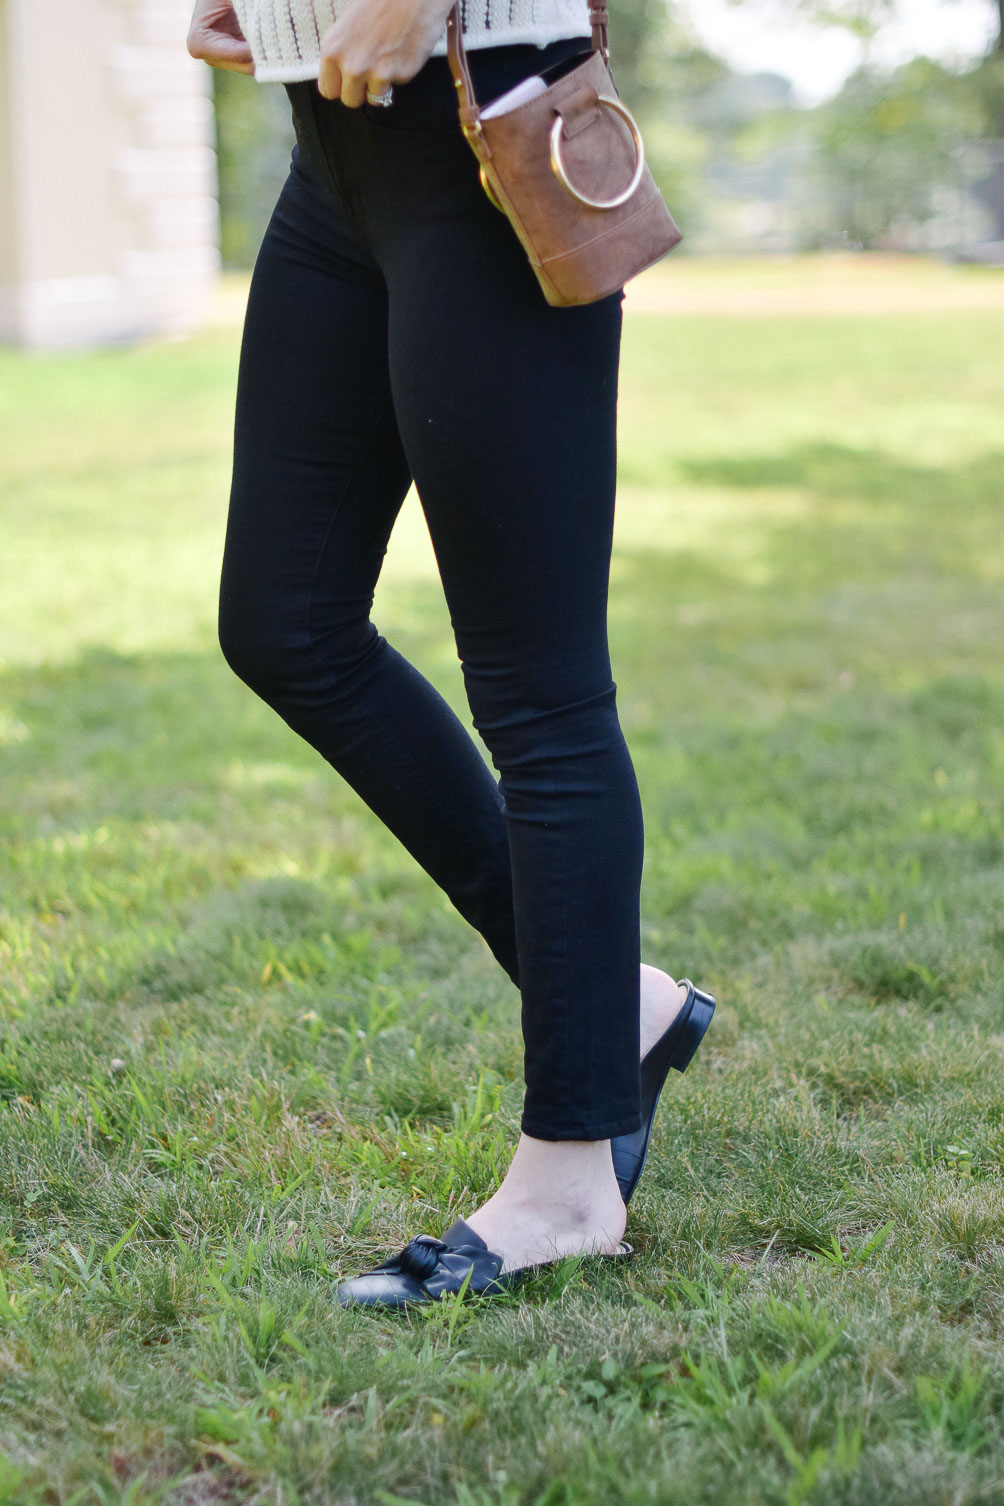 Leslie Musser styling a short sleeve sweater with black skinny jeans and leather mules for transitional fall style